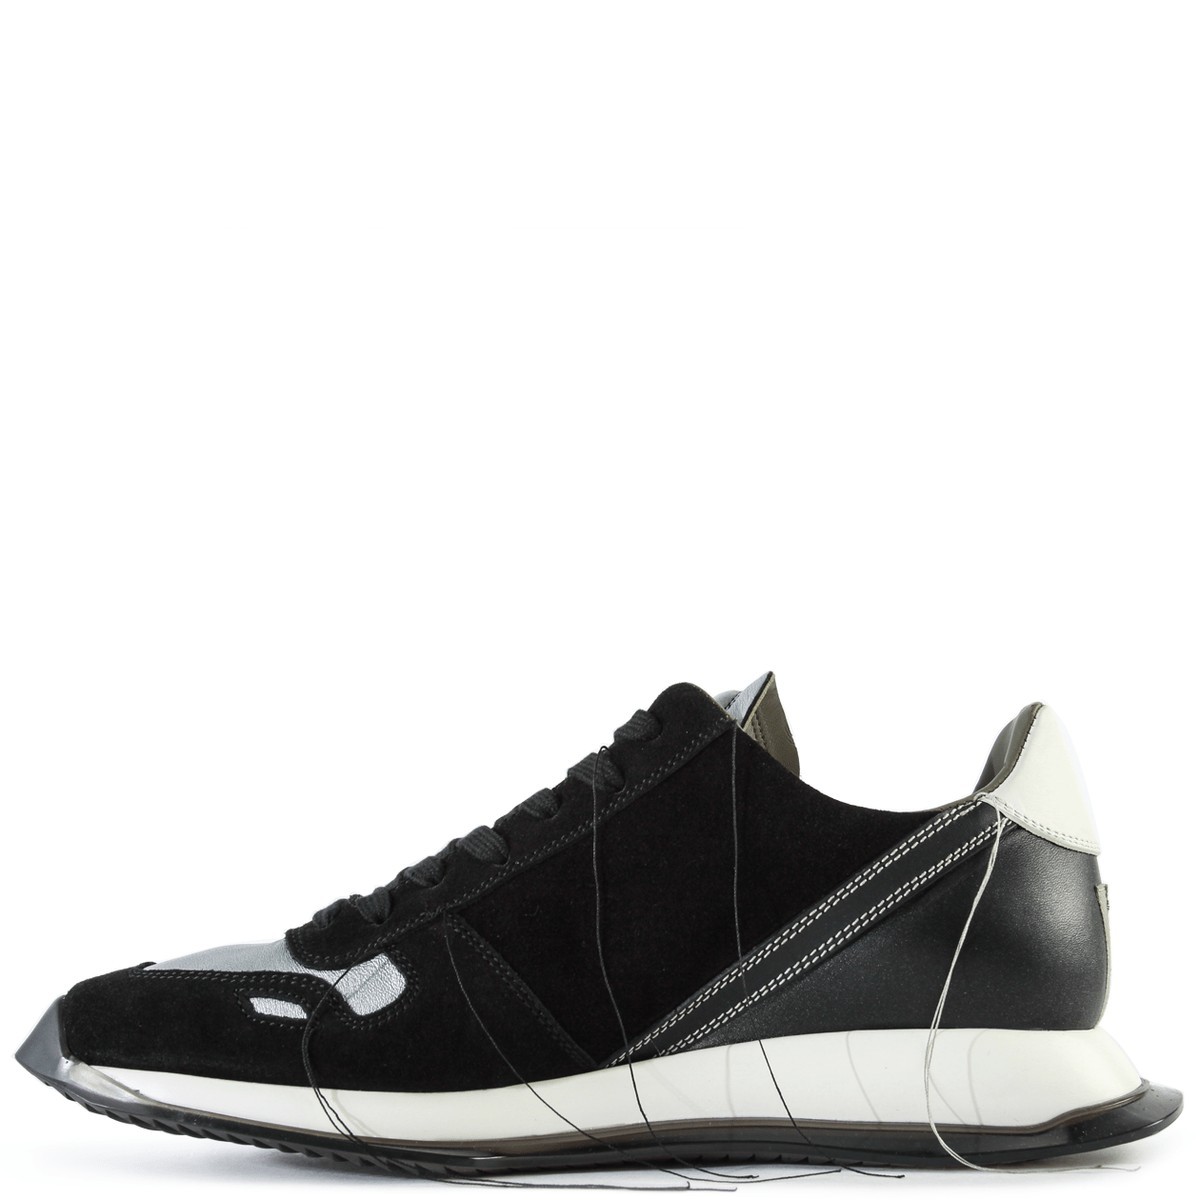 BNWT AW19 RICK OWENS "LARRY" NEW VINTAGE RUNNER LACE UP 44 - 14